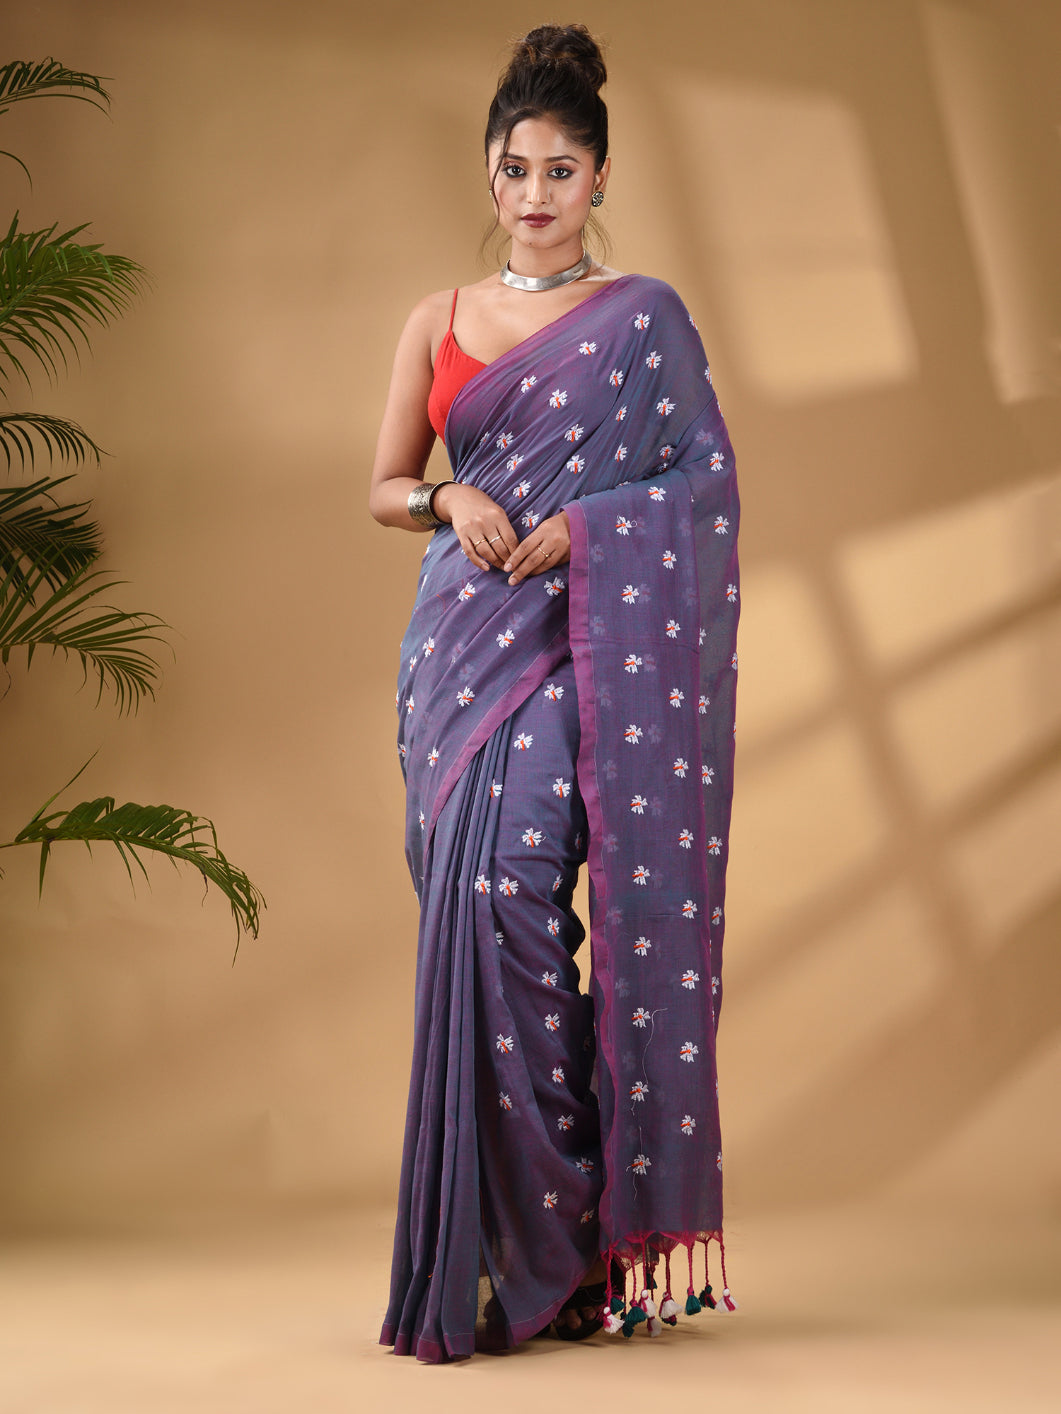 Lilac Cotton Handwoven Soft Saree With Floral Motifs